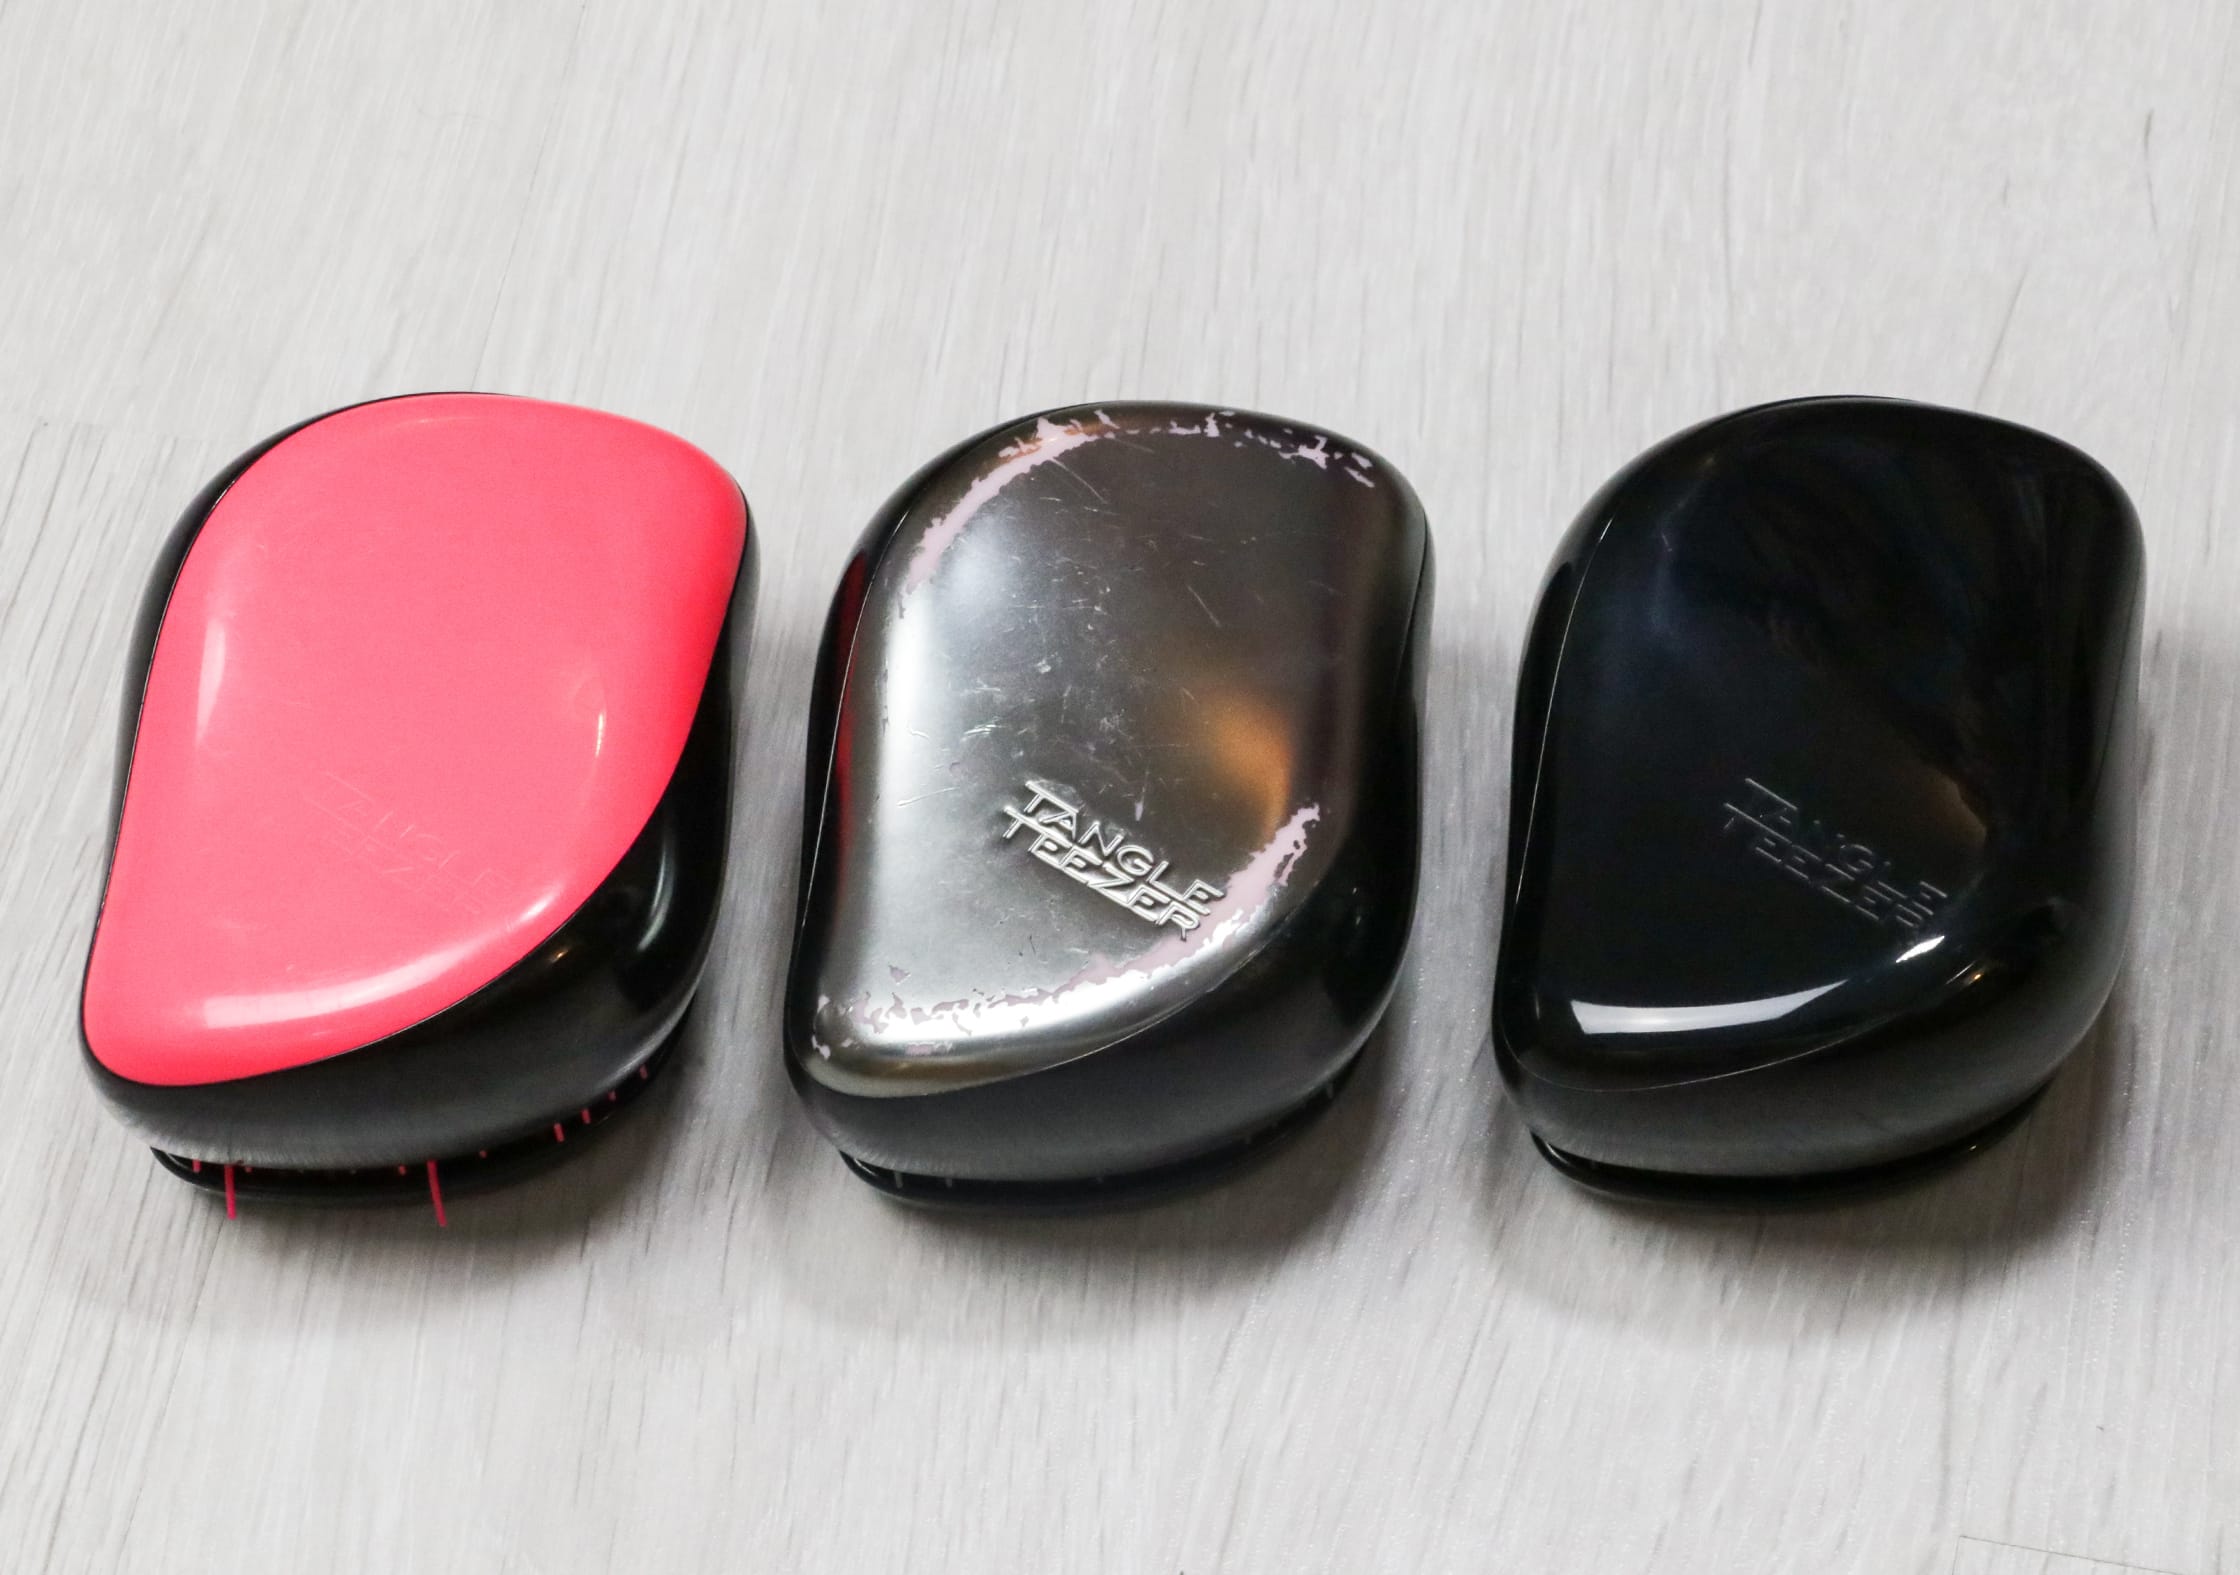 All Three Colors Of The Tangle Teezer Compact Styler We Have Been Testing